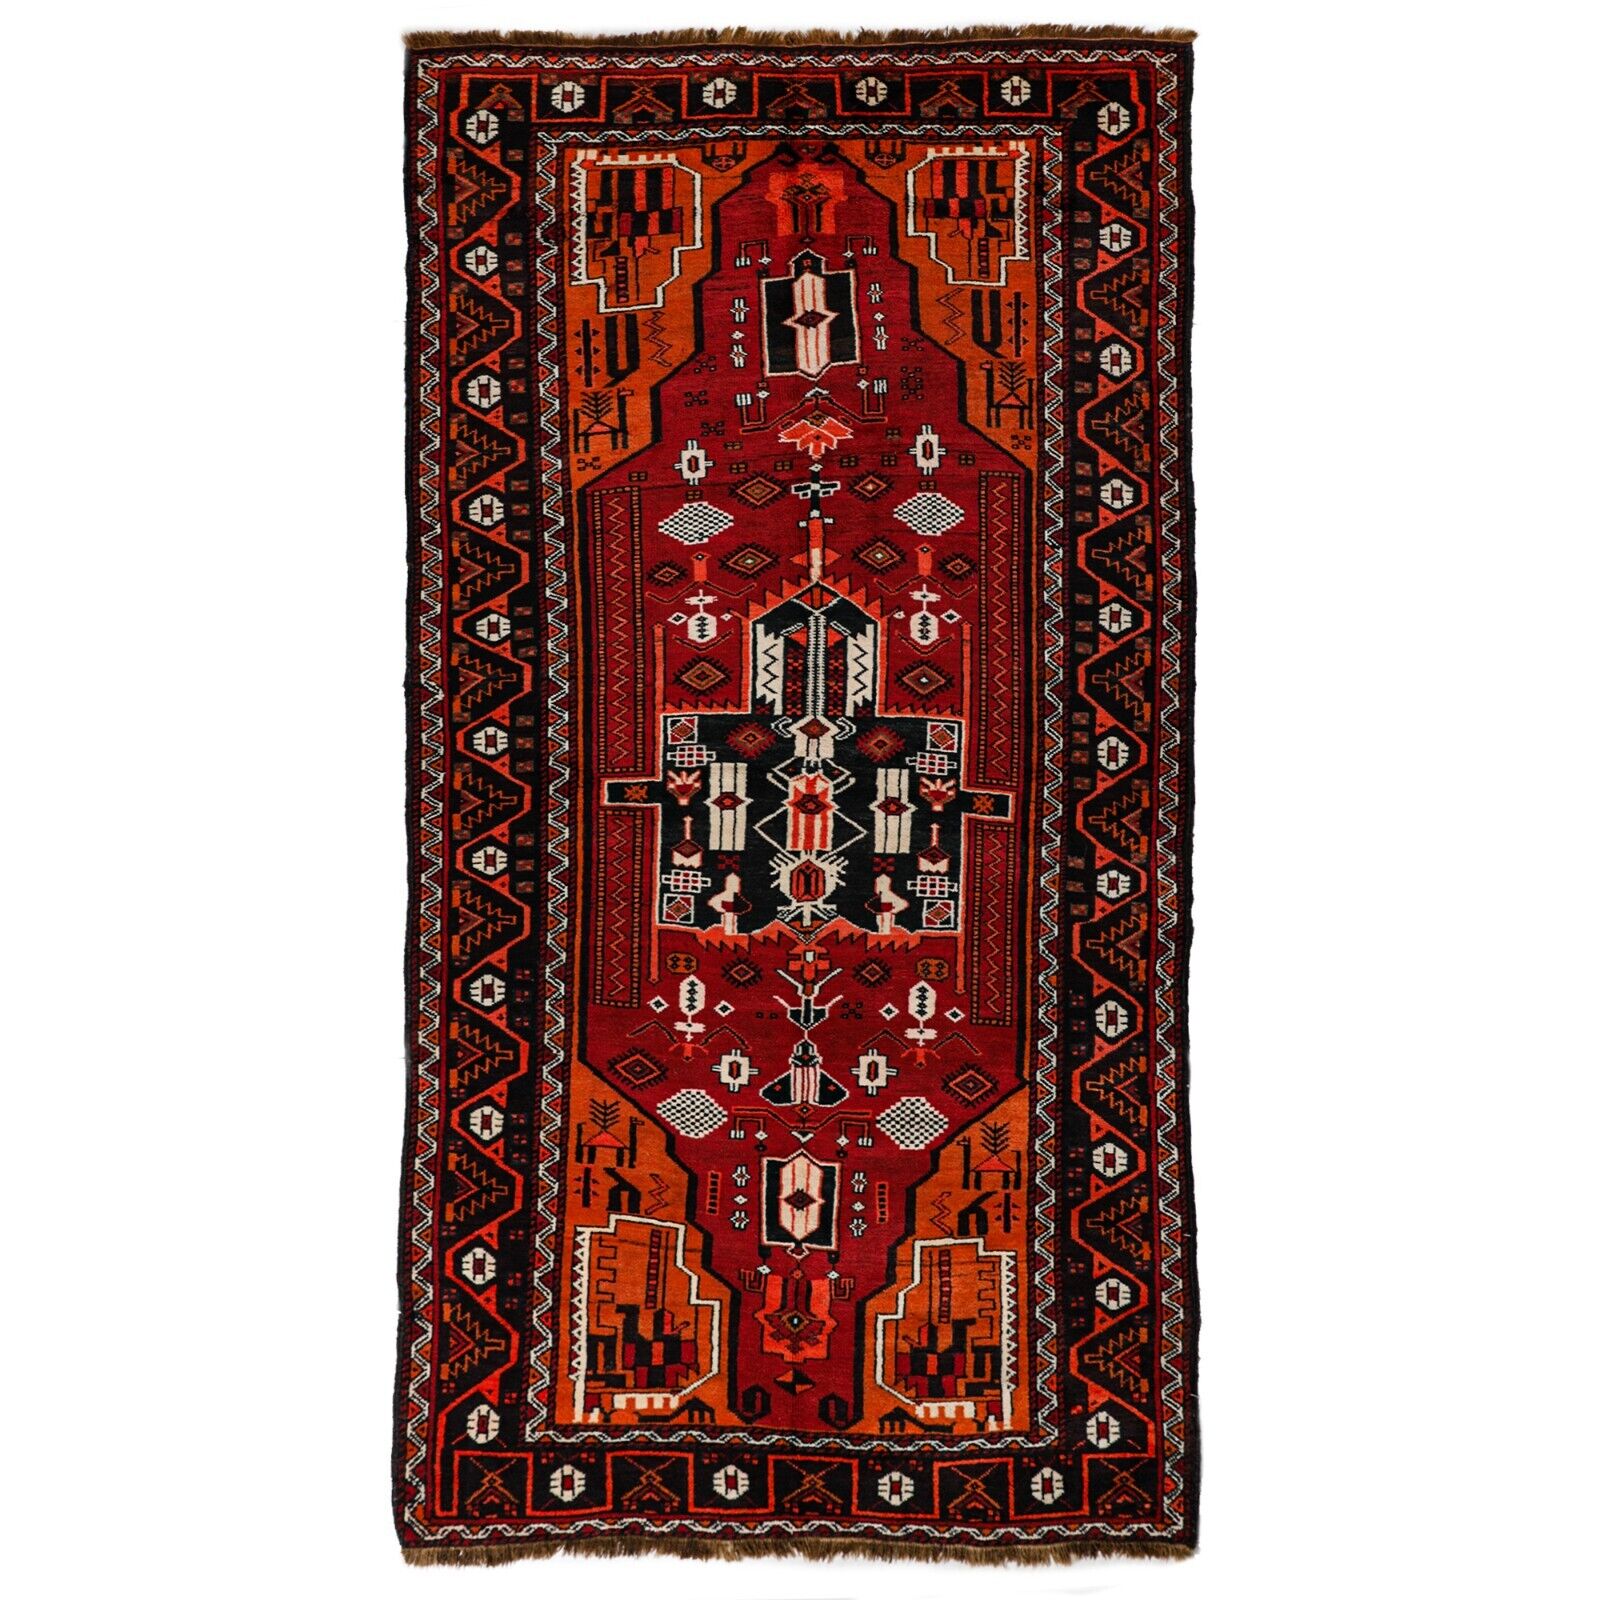 Turkish rug Anatolian pattern very quality rugs for home area rug 11877